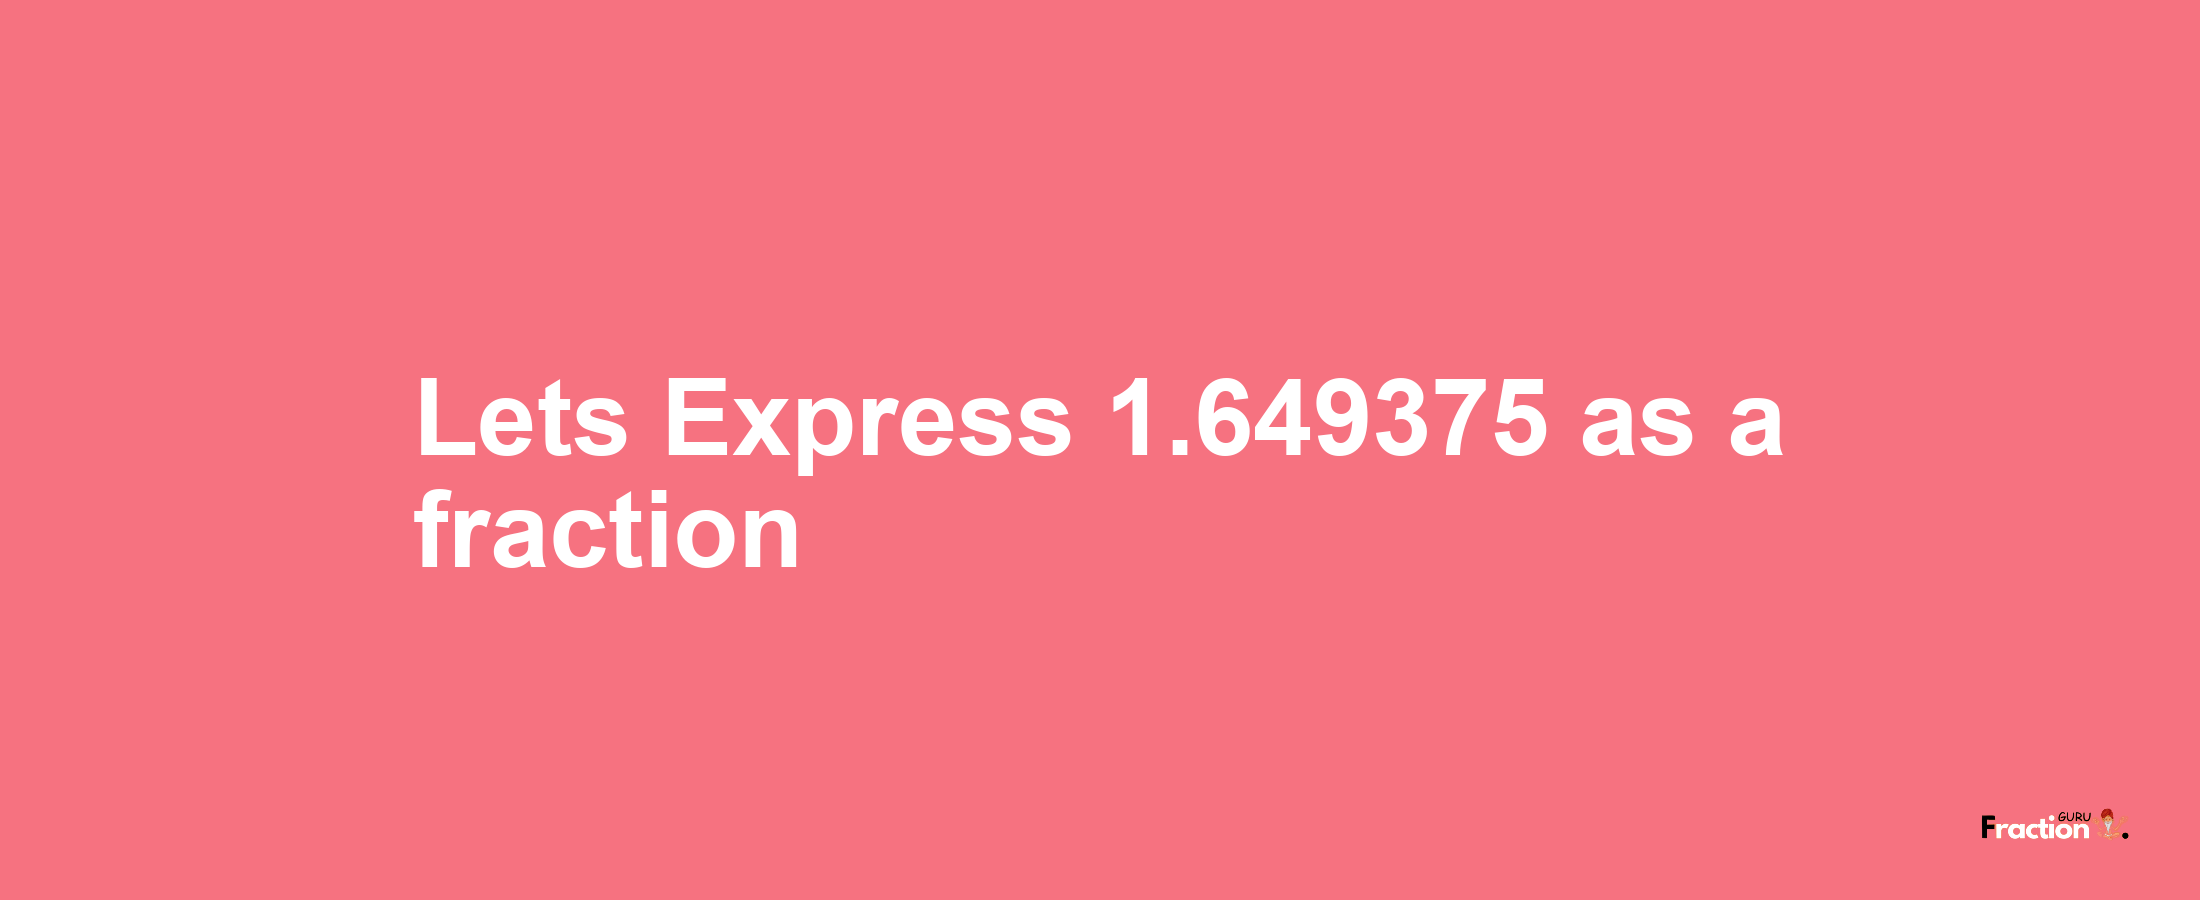 Lets Express 1.649375 as afraction